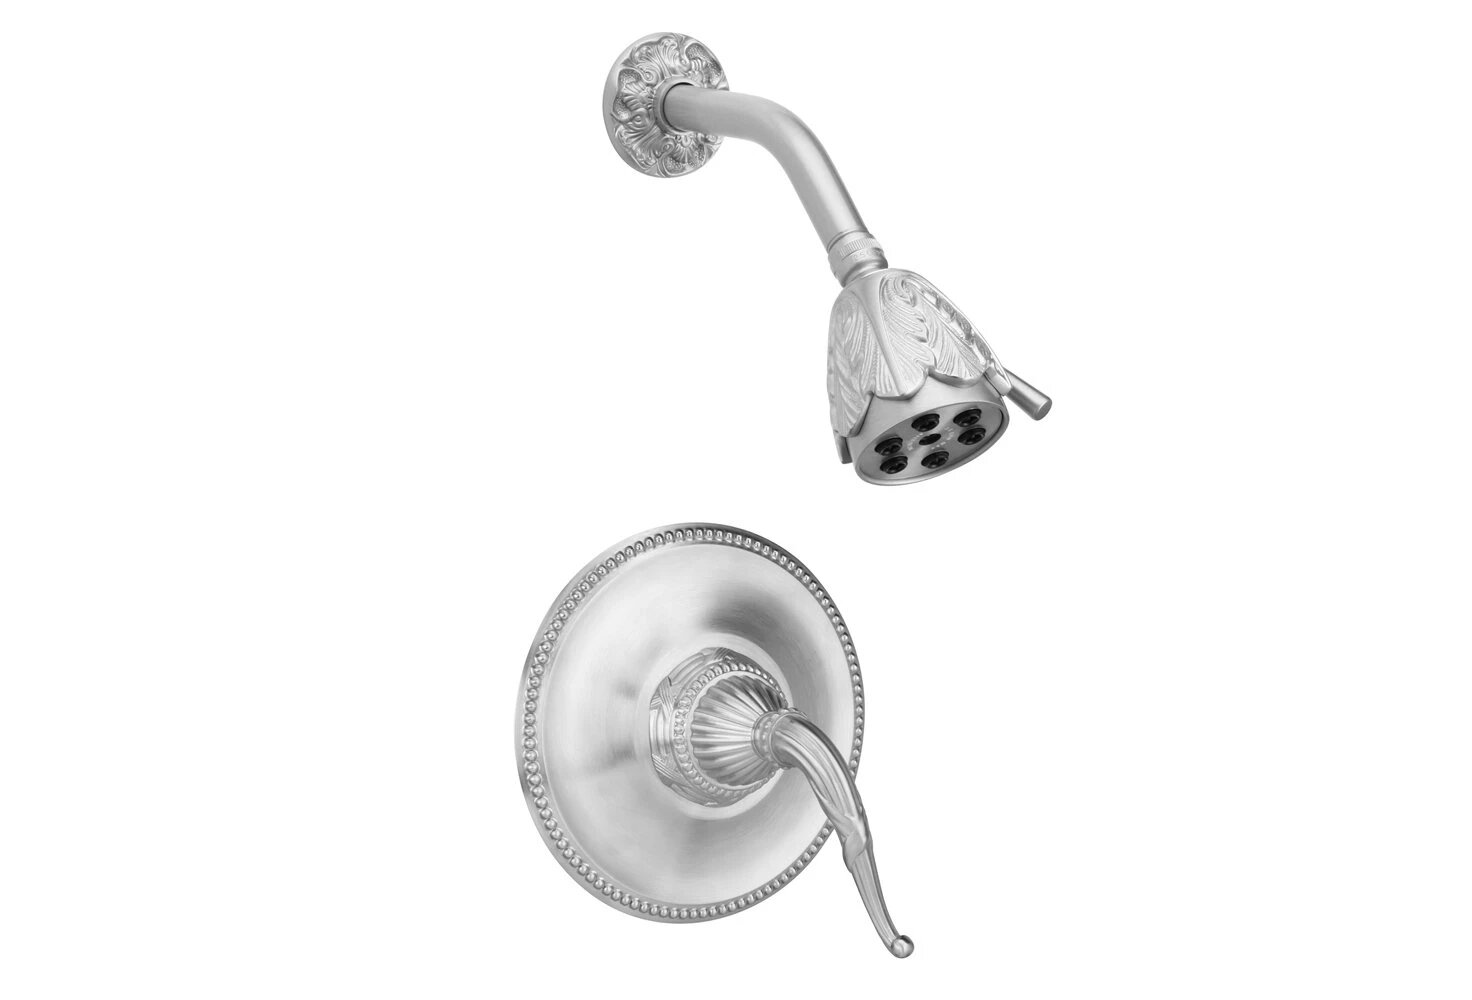 PHYLRICH PB3137 RIBBON & REED WALL MOUNT PRESSURE BALANCE SHOWER SET WITH LEVER HANDLE